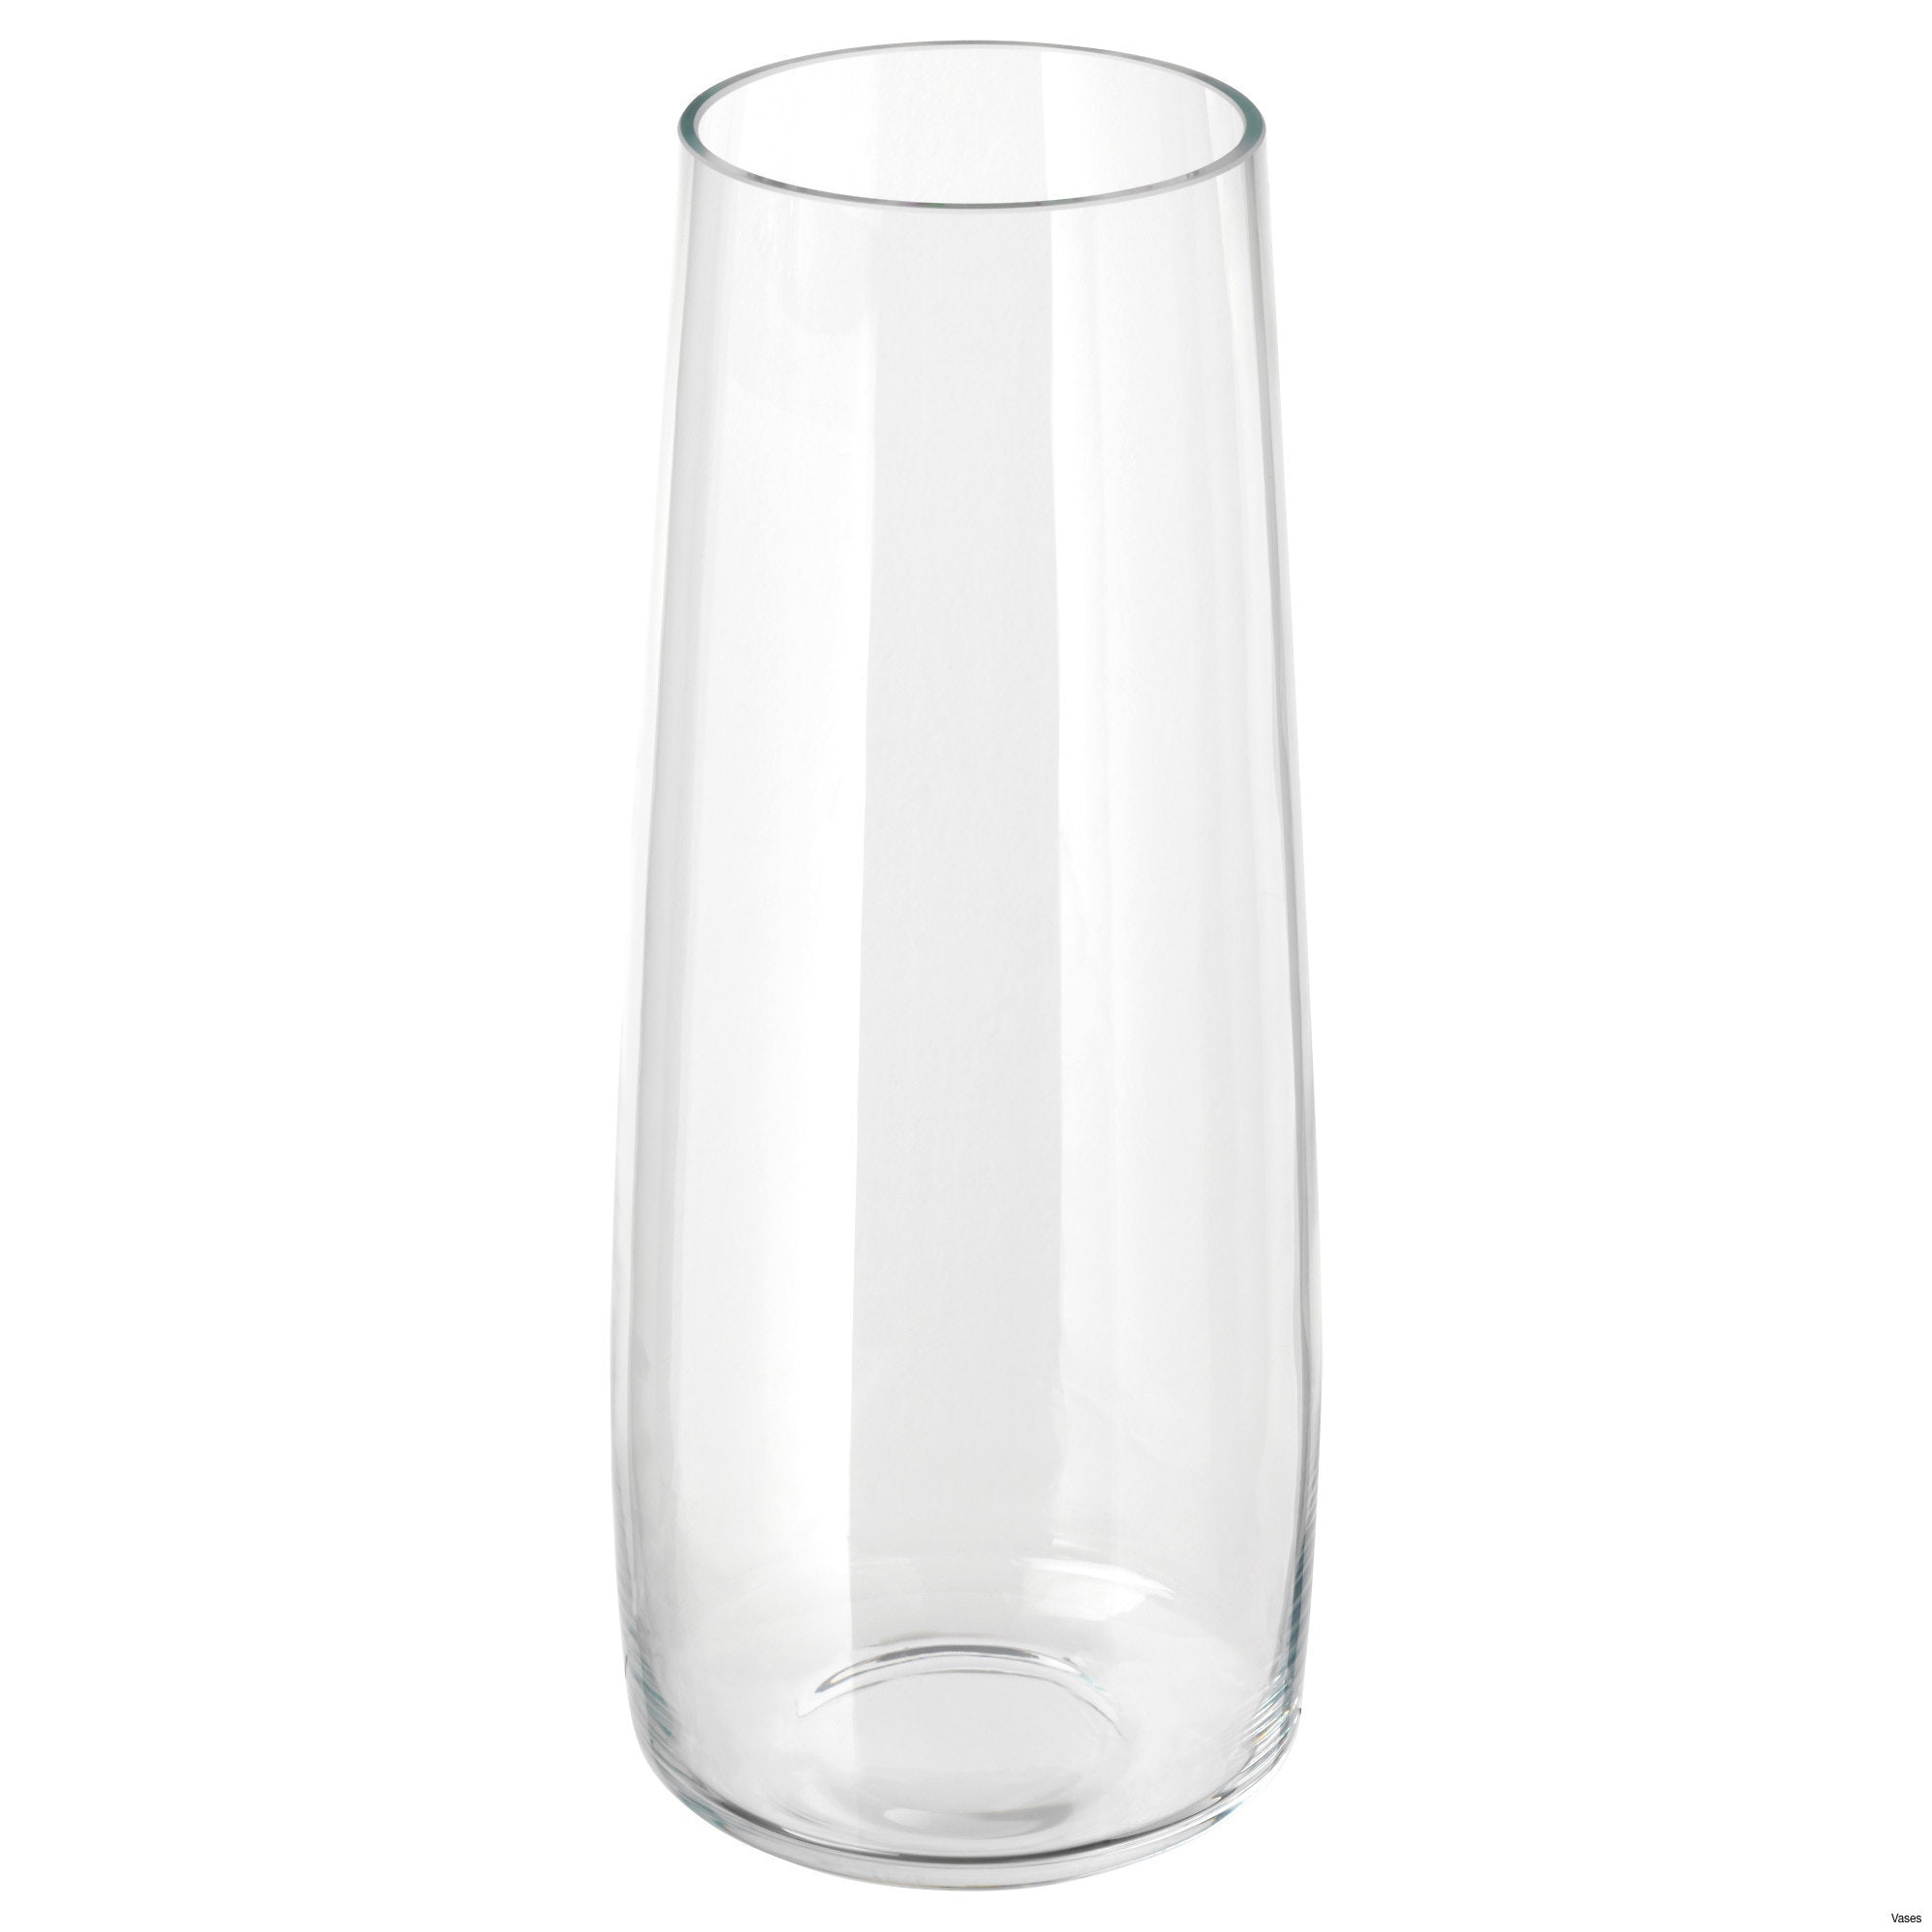 16 Trendy 10 Inch Cylinder Vases Bulk 2023 free download 10 inch cylinder vases bulk of large glass vases stock 24 inch vases bulk 23 5 flared glass vase within large glass vases pictures clear glass planters fresh clear glass vases of large glass